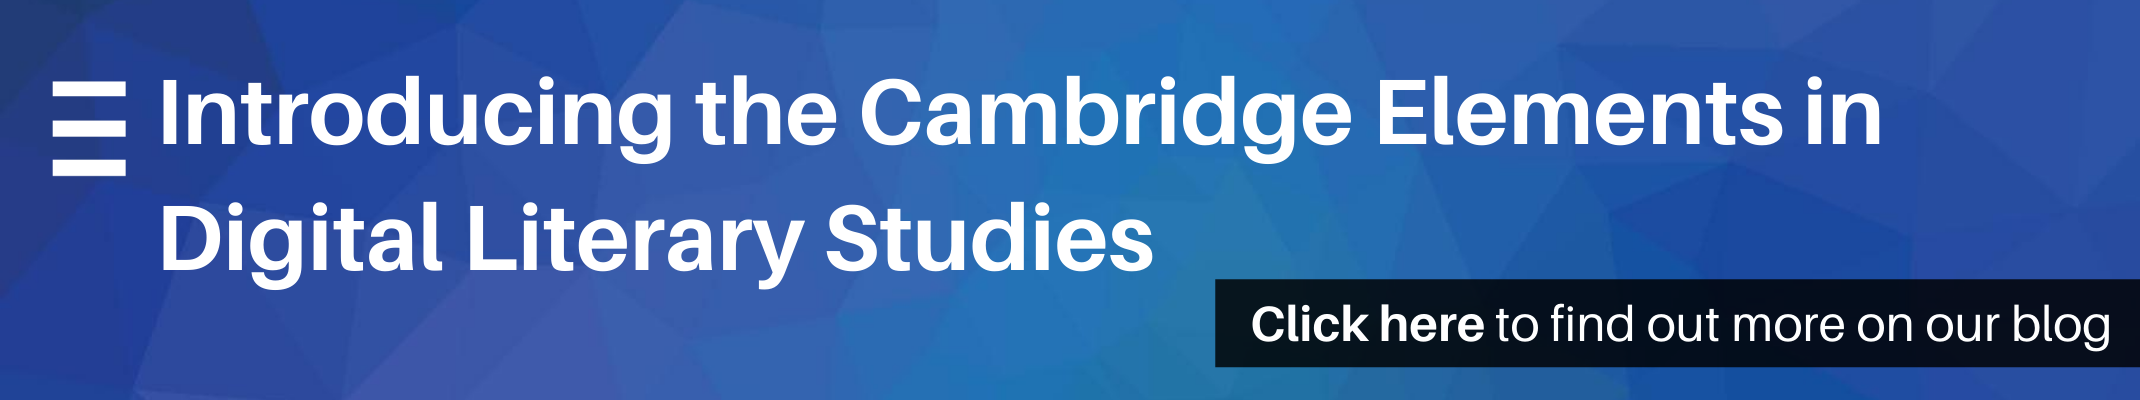 Introducing the Cambridge Elements in Digital Literary Studies - Click to read more on our blog